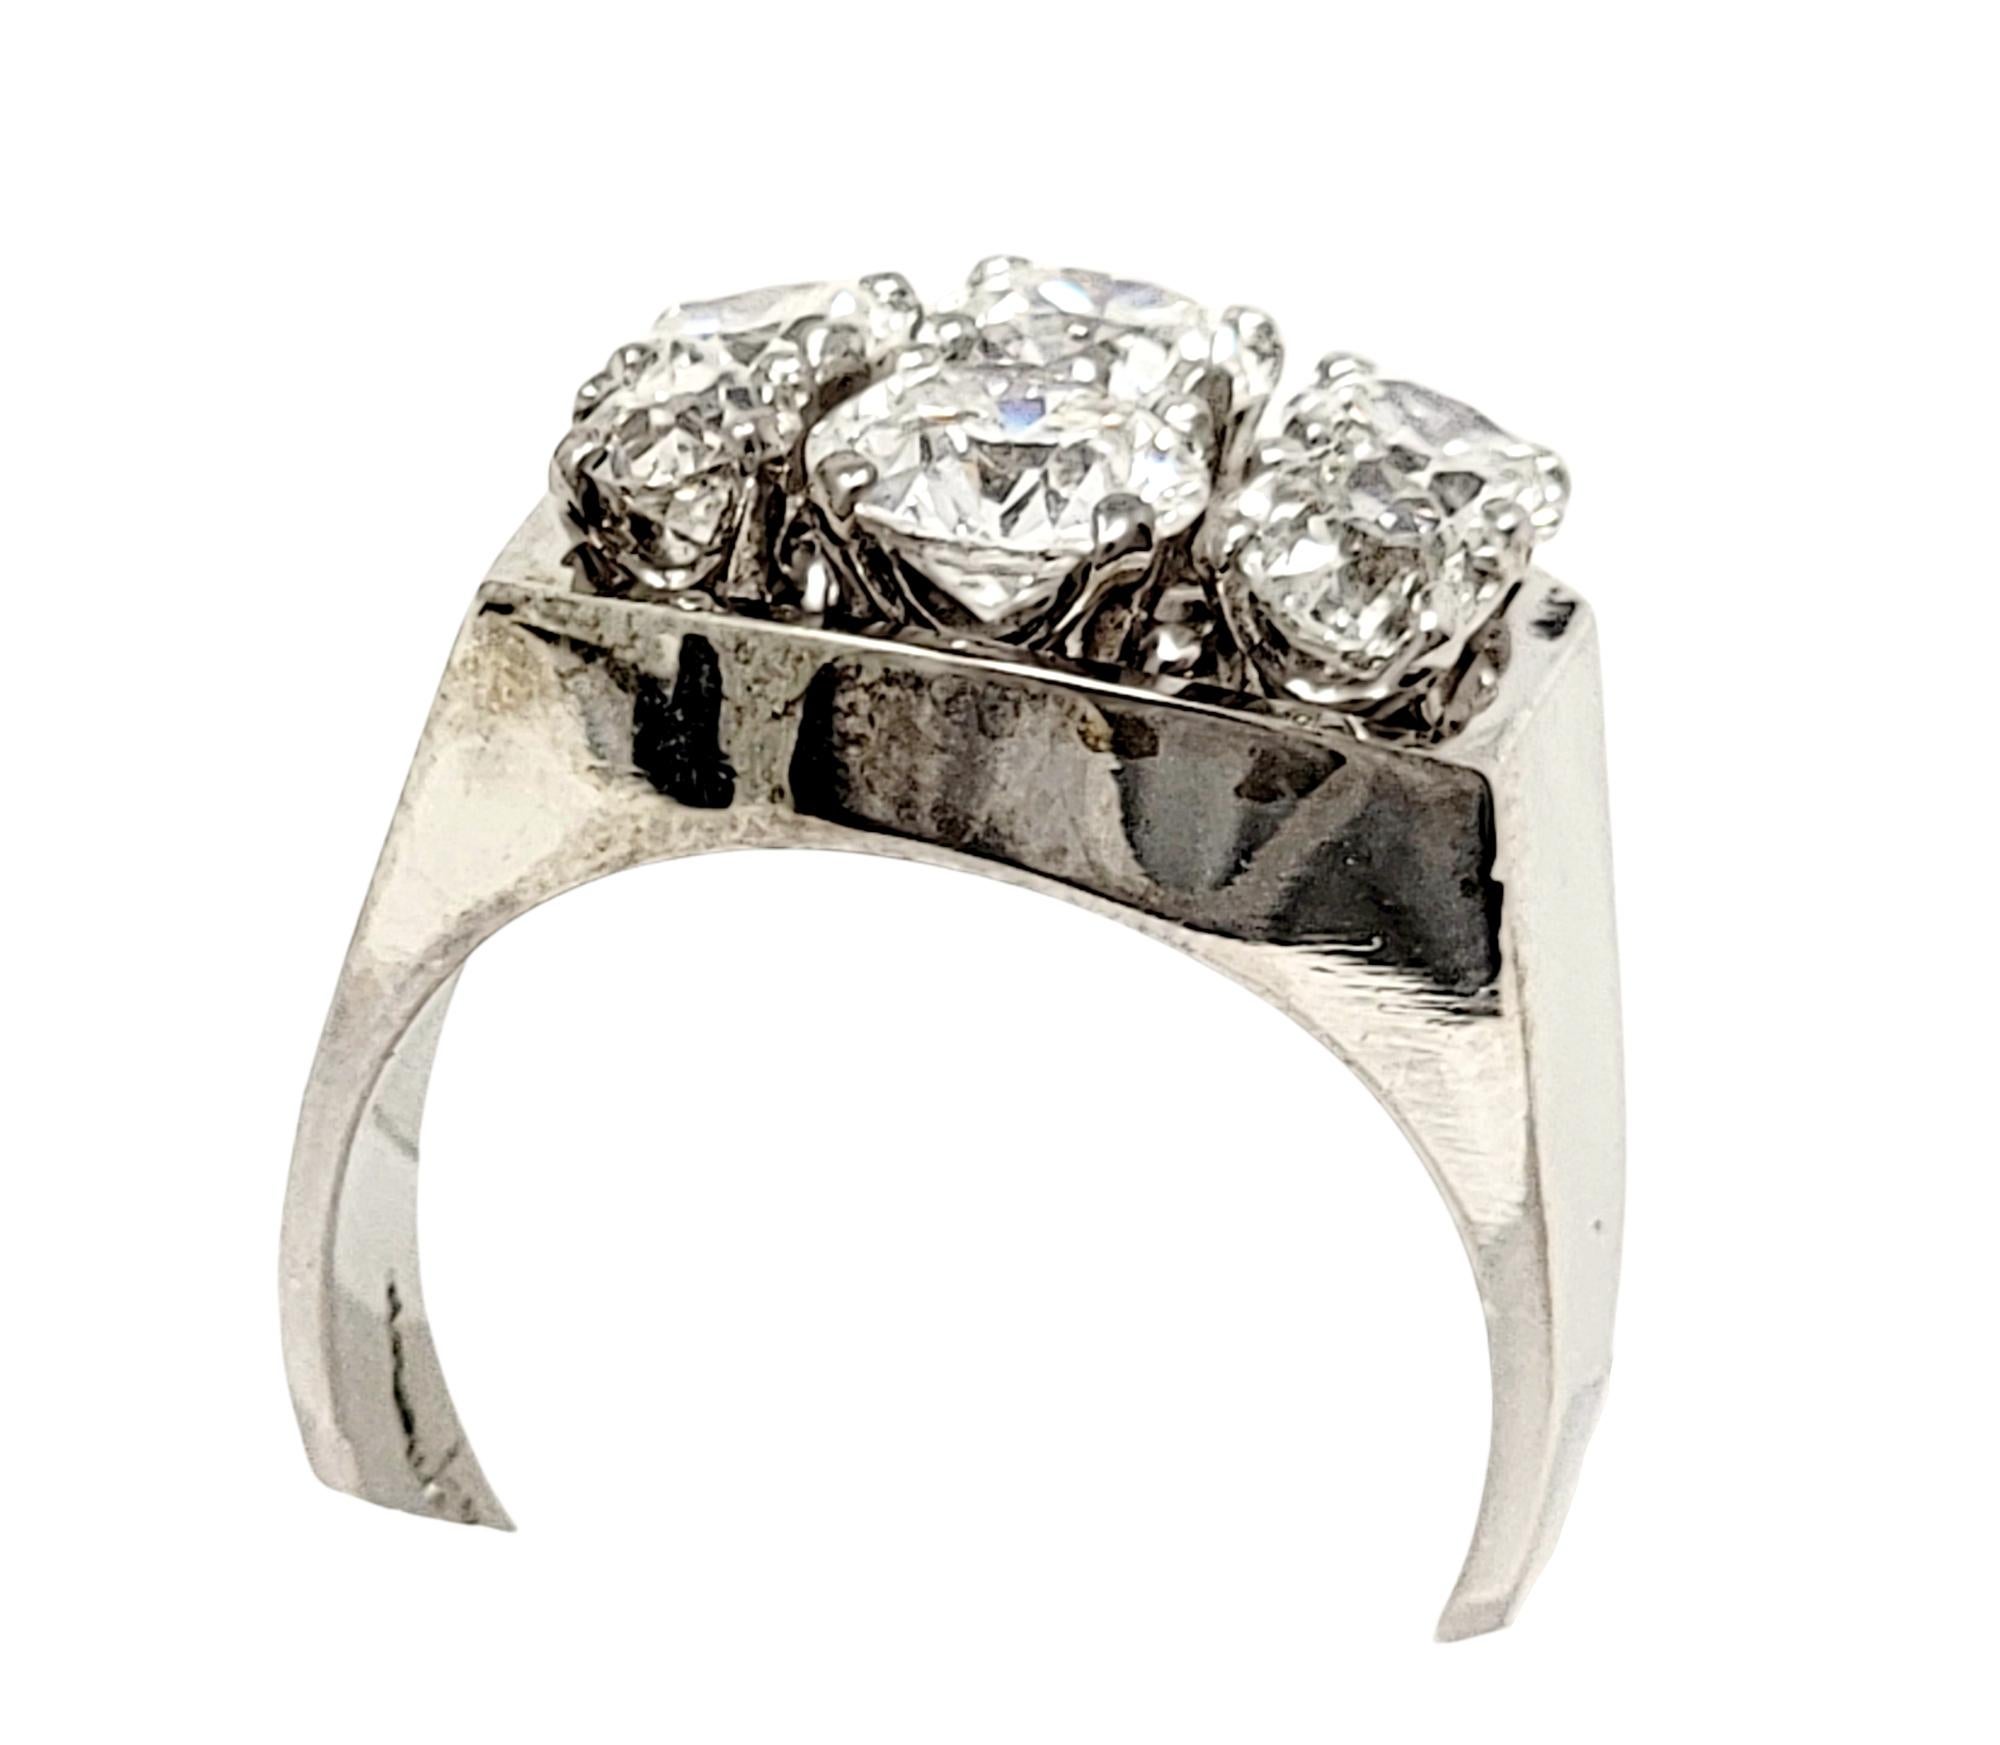 2.75 Carats Total Mixed Cut Round 6 Diamond Band Ring in 18 Karat White Gold In Good Condition For Sale In Scottsdale, AZ